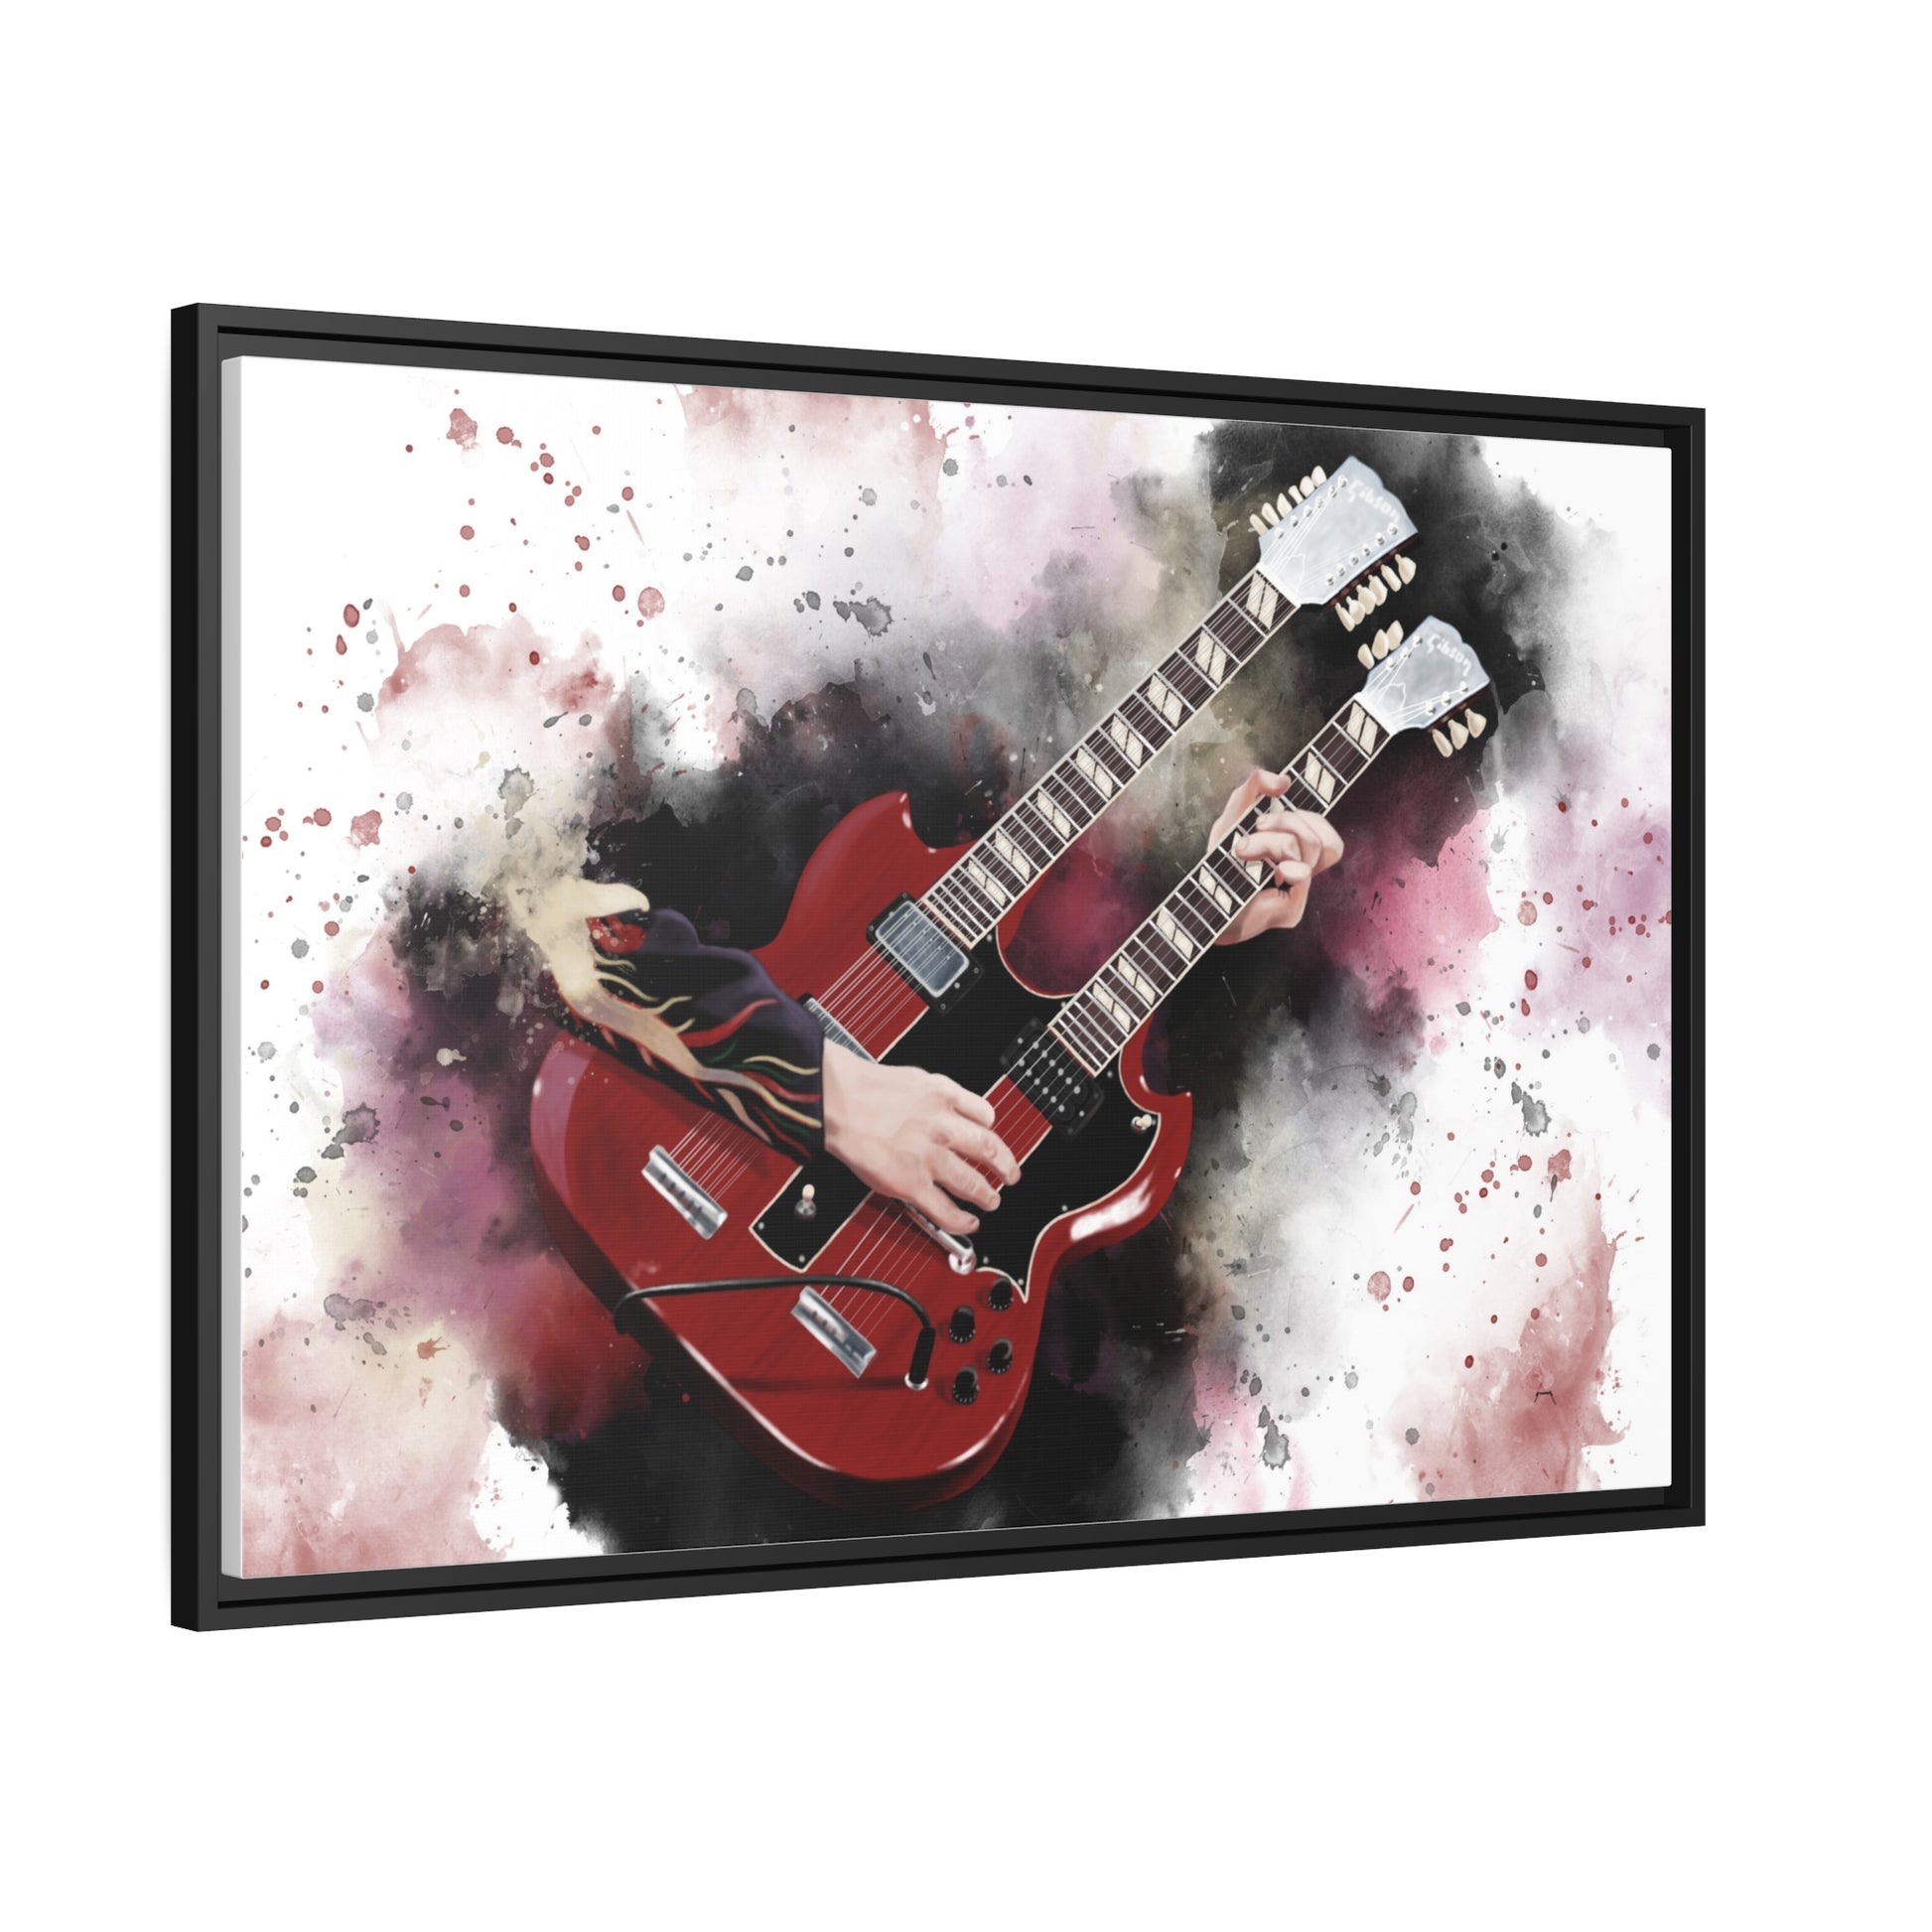 Digital painting of double neck electric guitar printed on canvas.